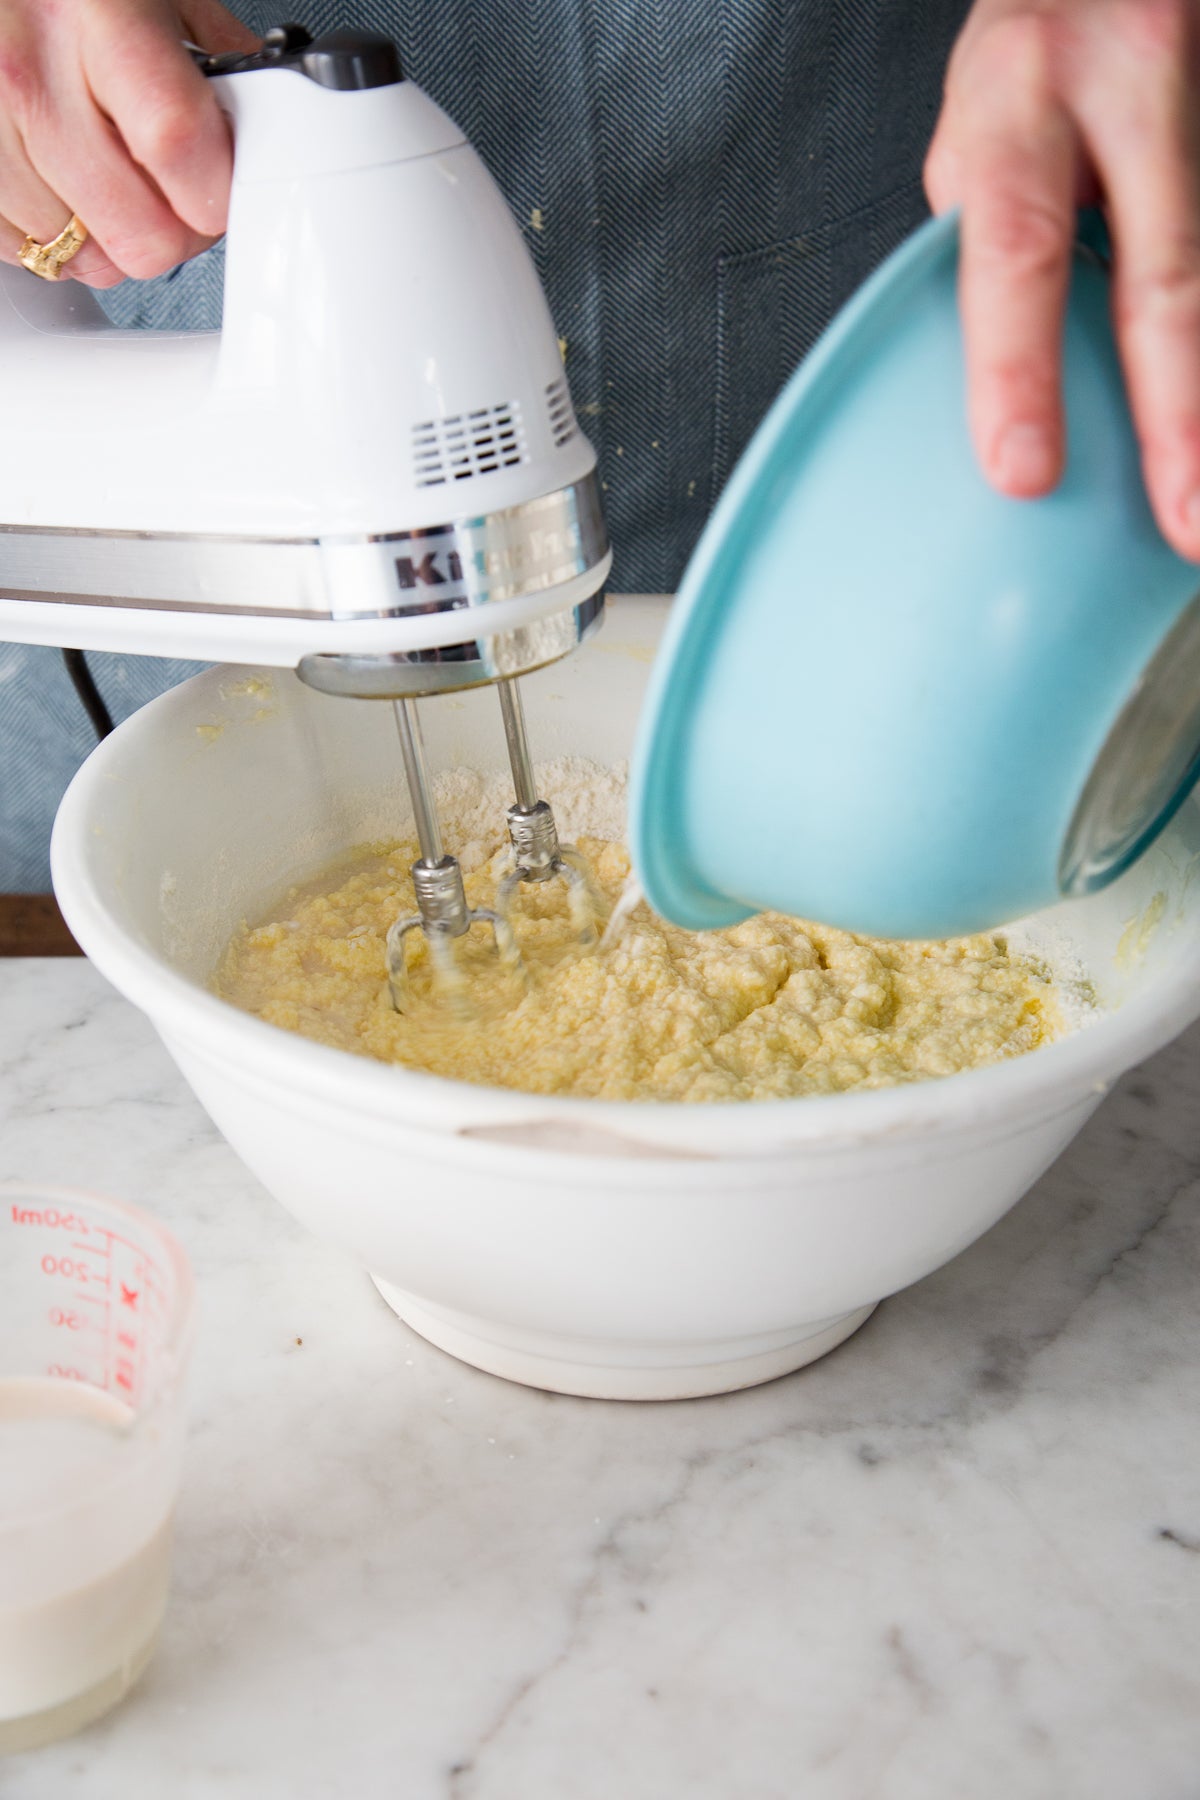 How to Avoid Curdled Cake Batter - Pastries Like a Pro